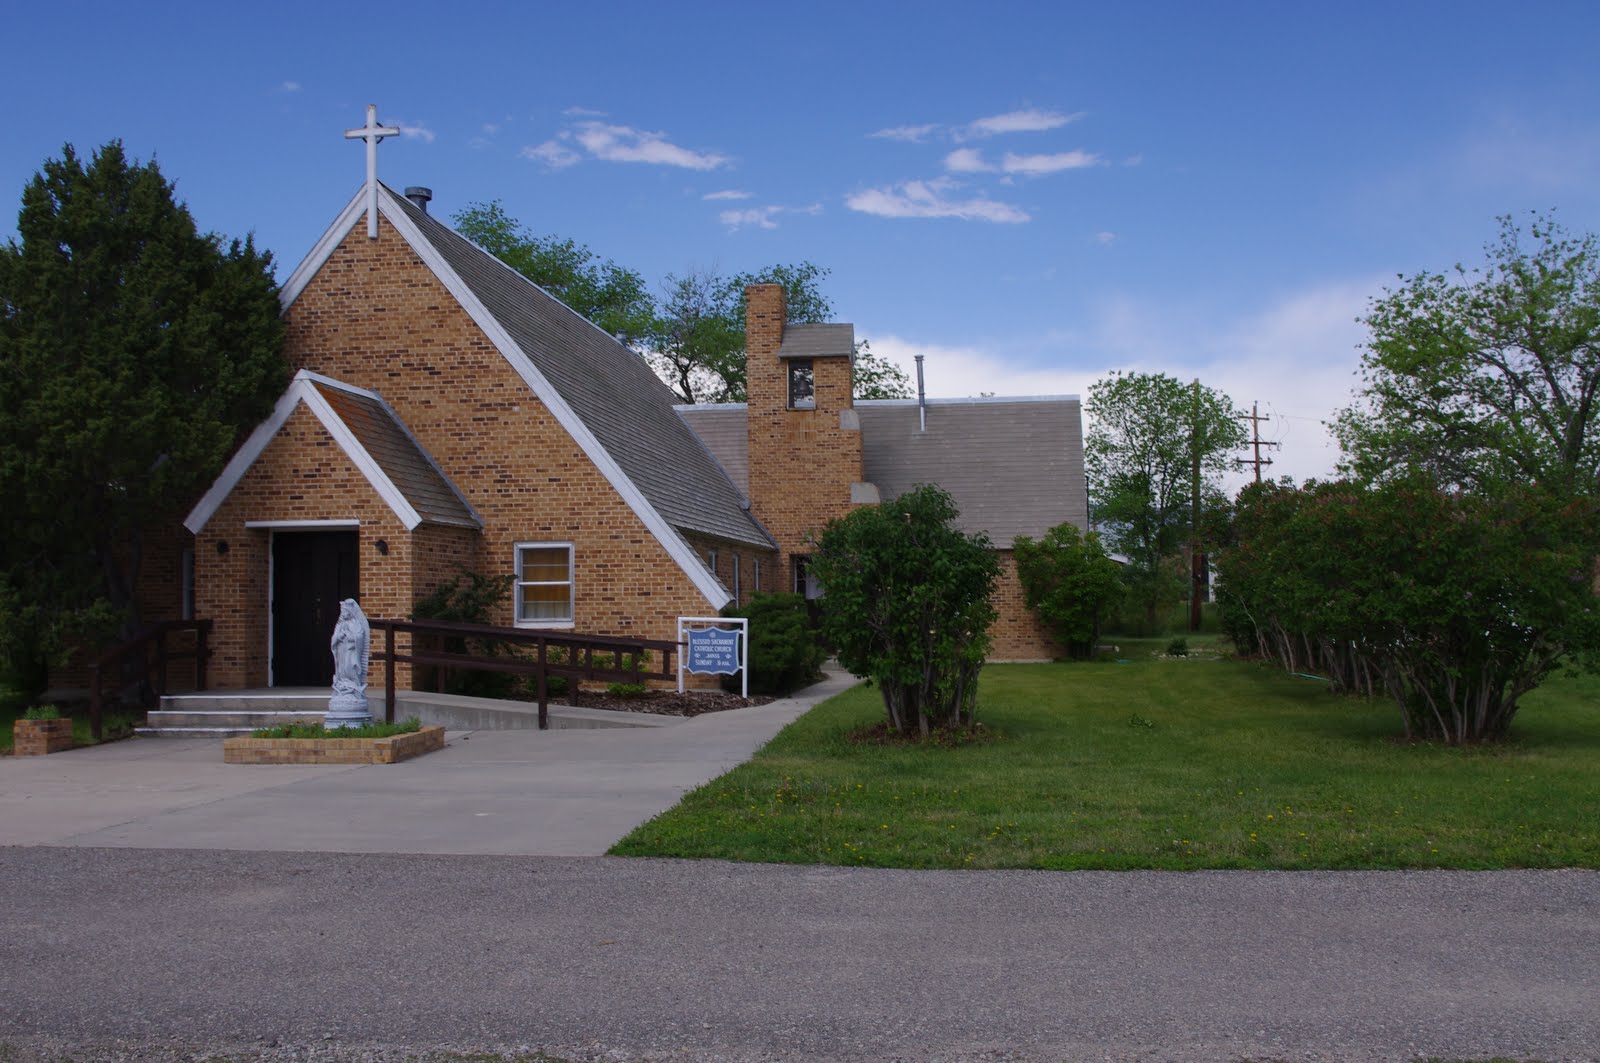 Ft. Washakie - Blessed Sacrament Mission Church